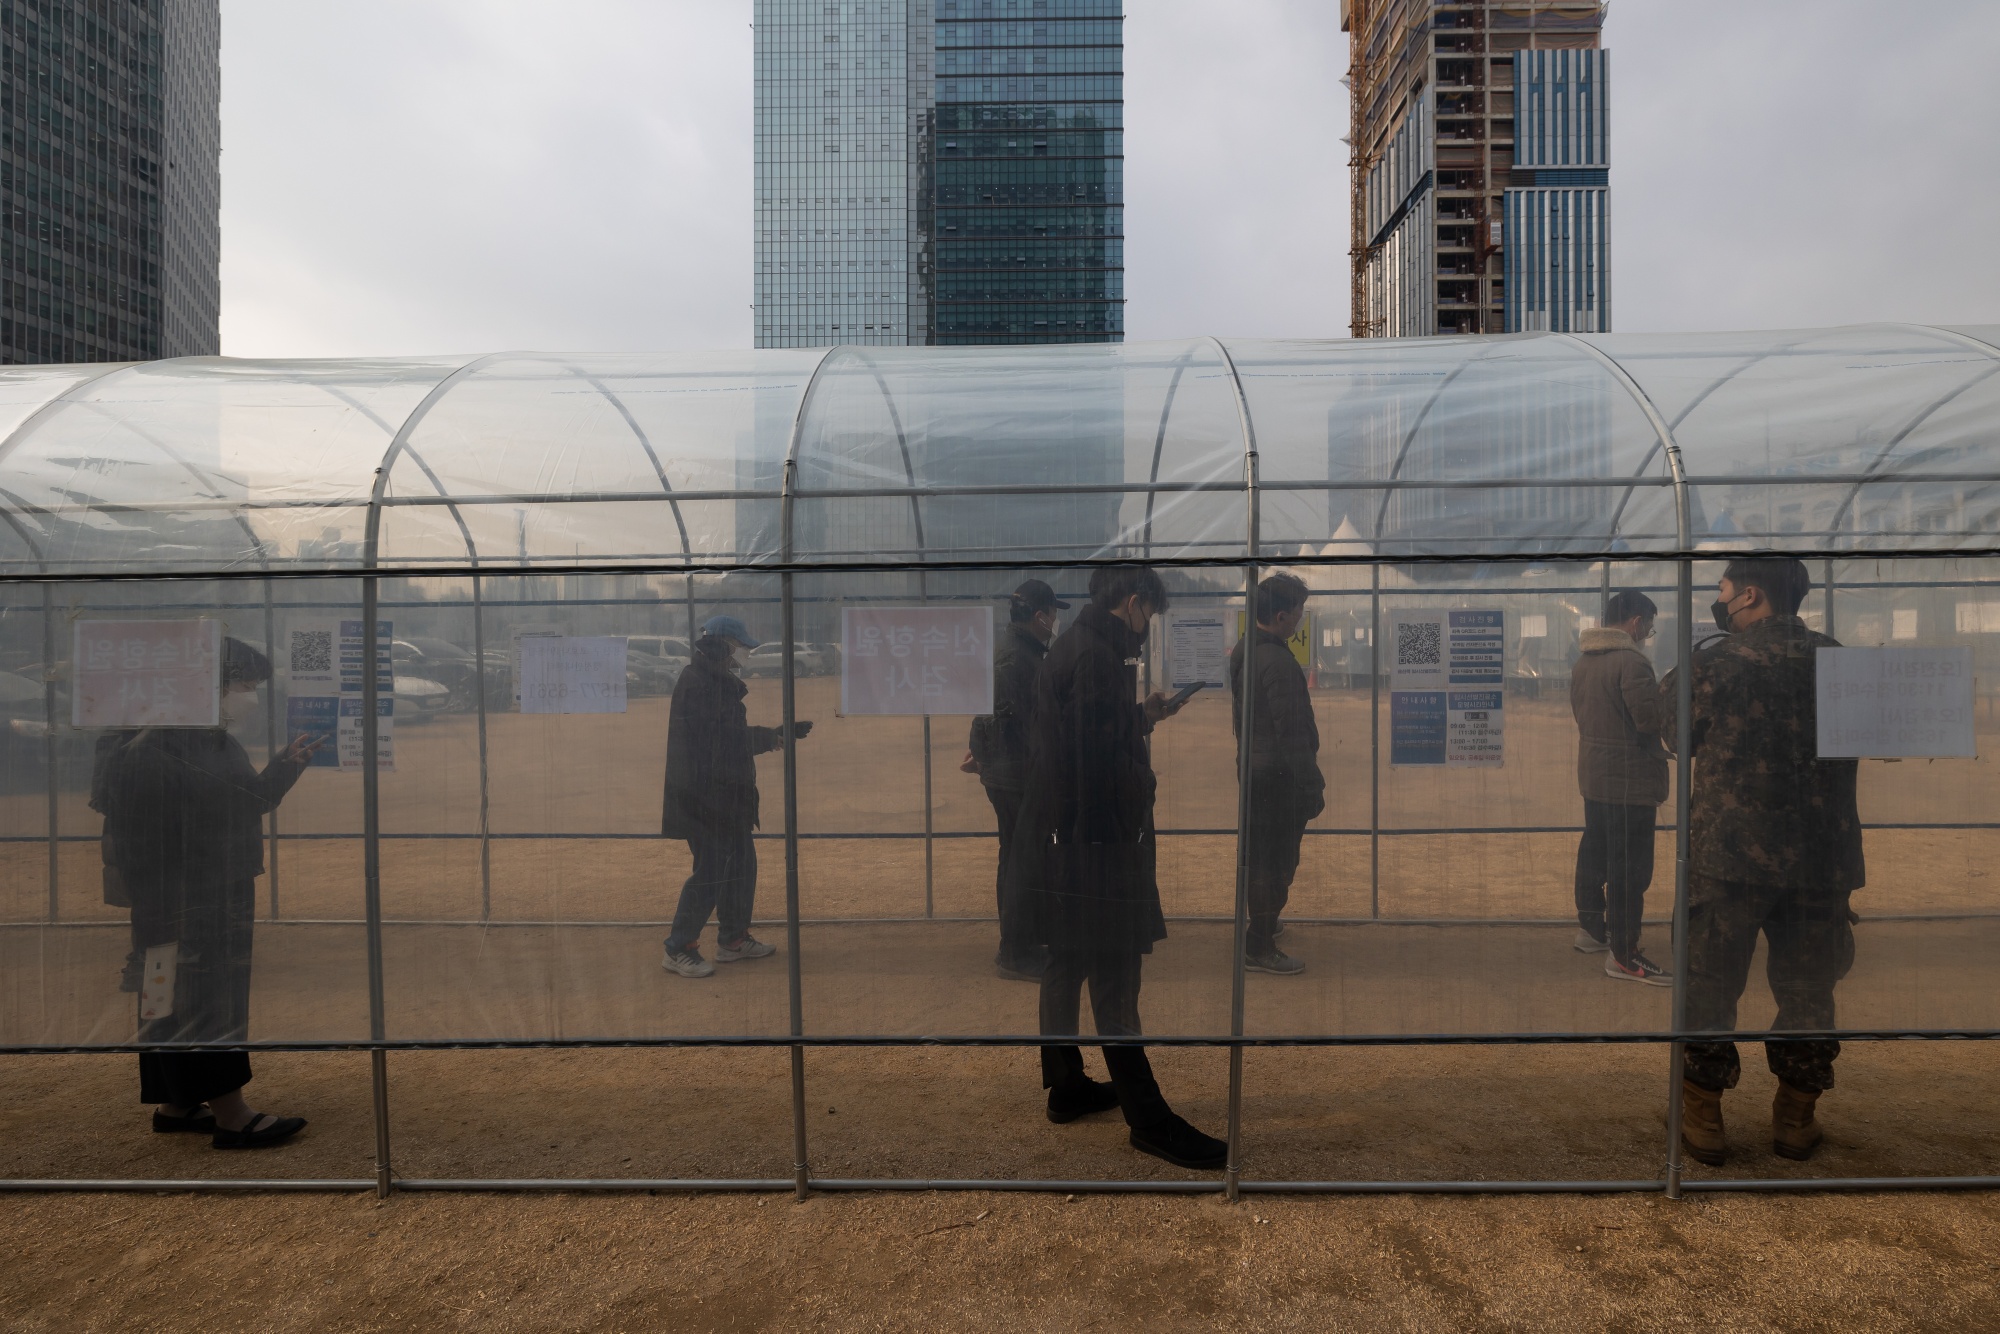 Members of the public wait in line at a temporary Covid-19 testing station outside Yongsan Station in Seoul.